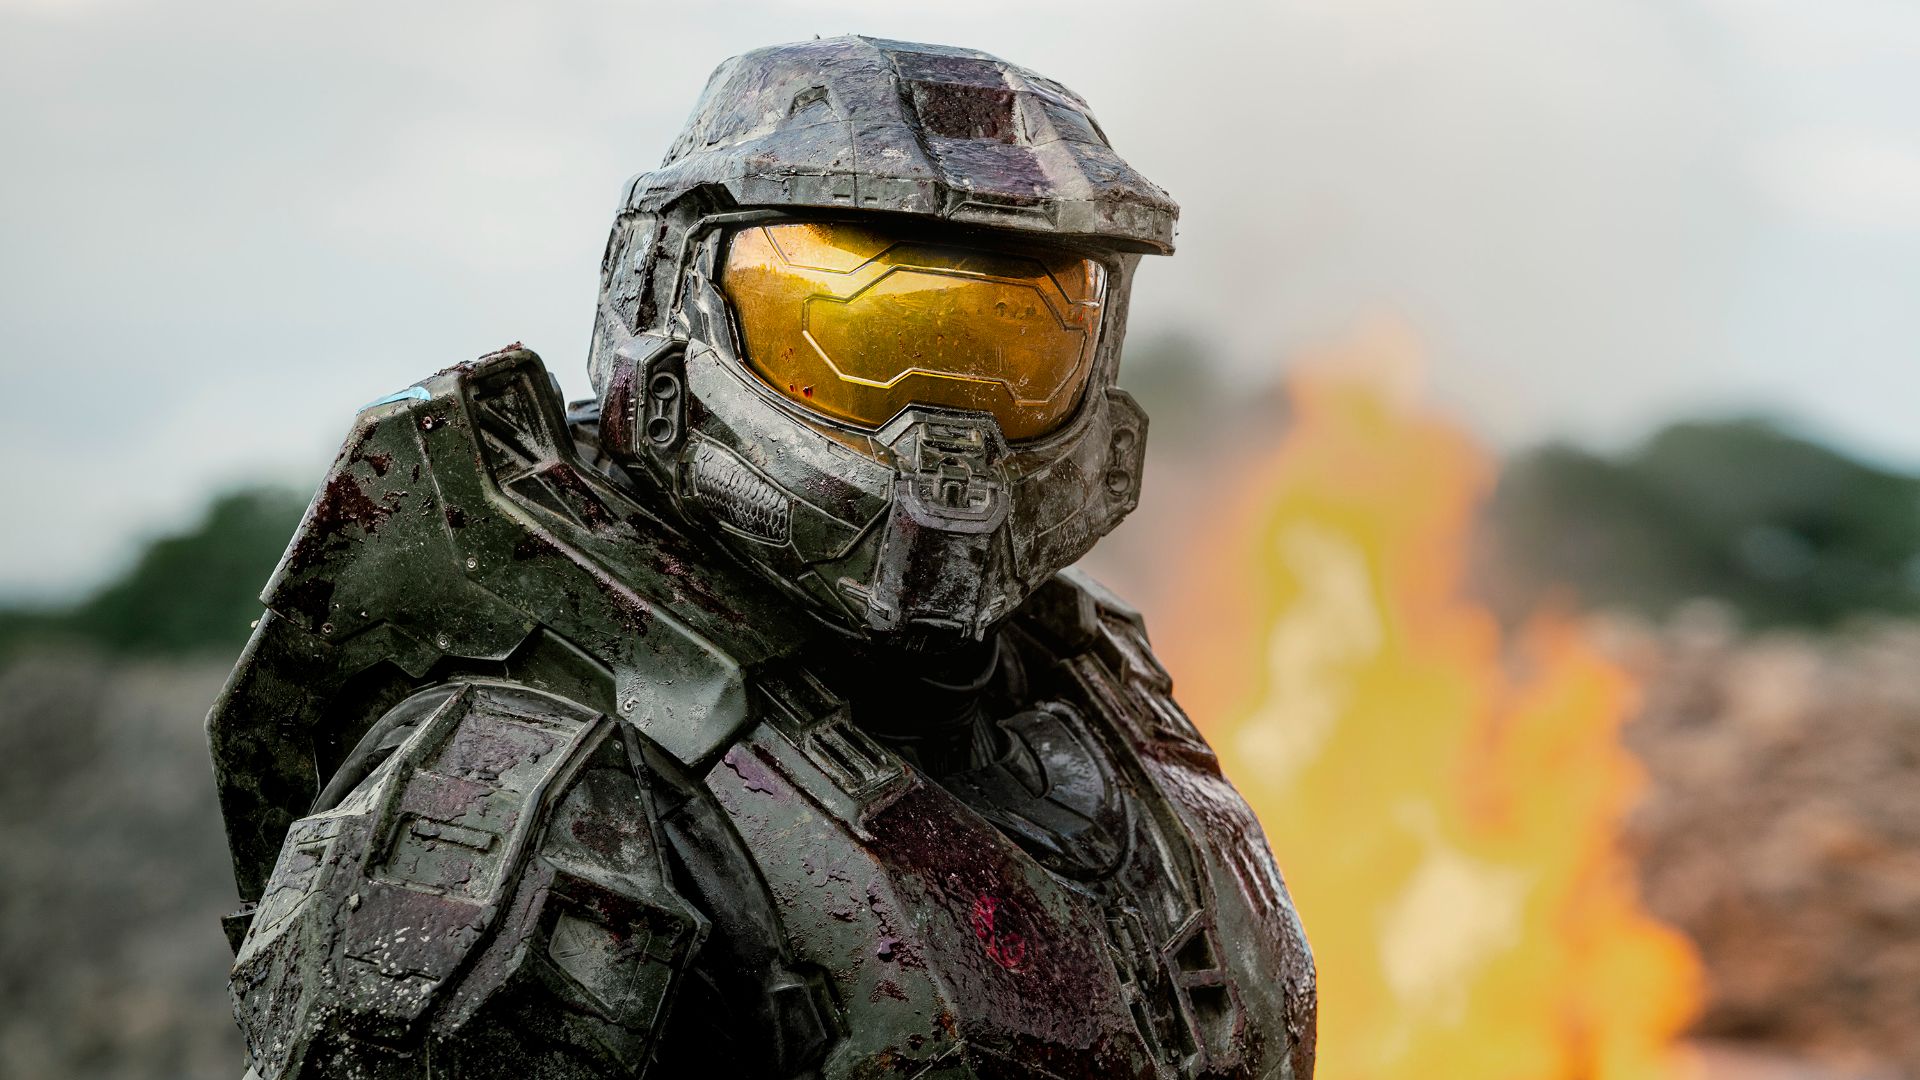 Halo episode 6 review: “A breathless episode that’s the show’s best yet”ByBradley Russellpublished 28 April 22Review